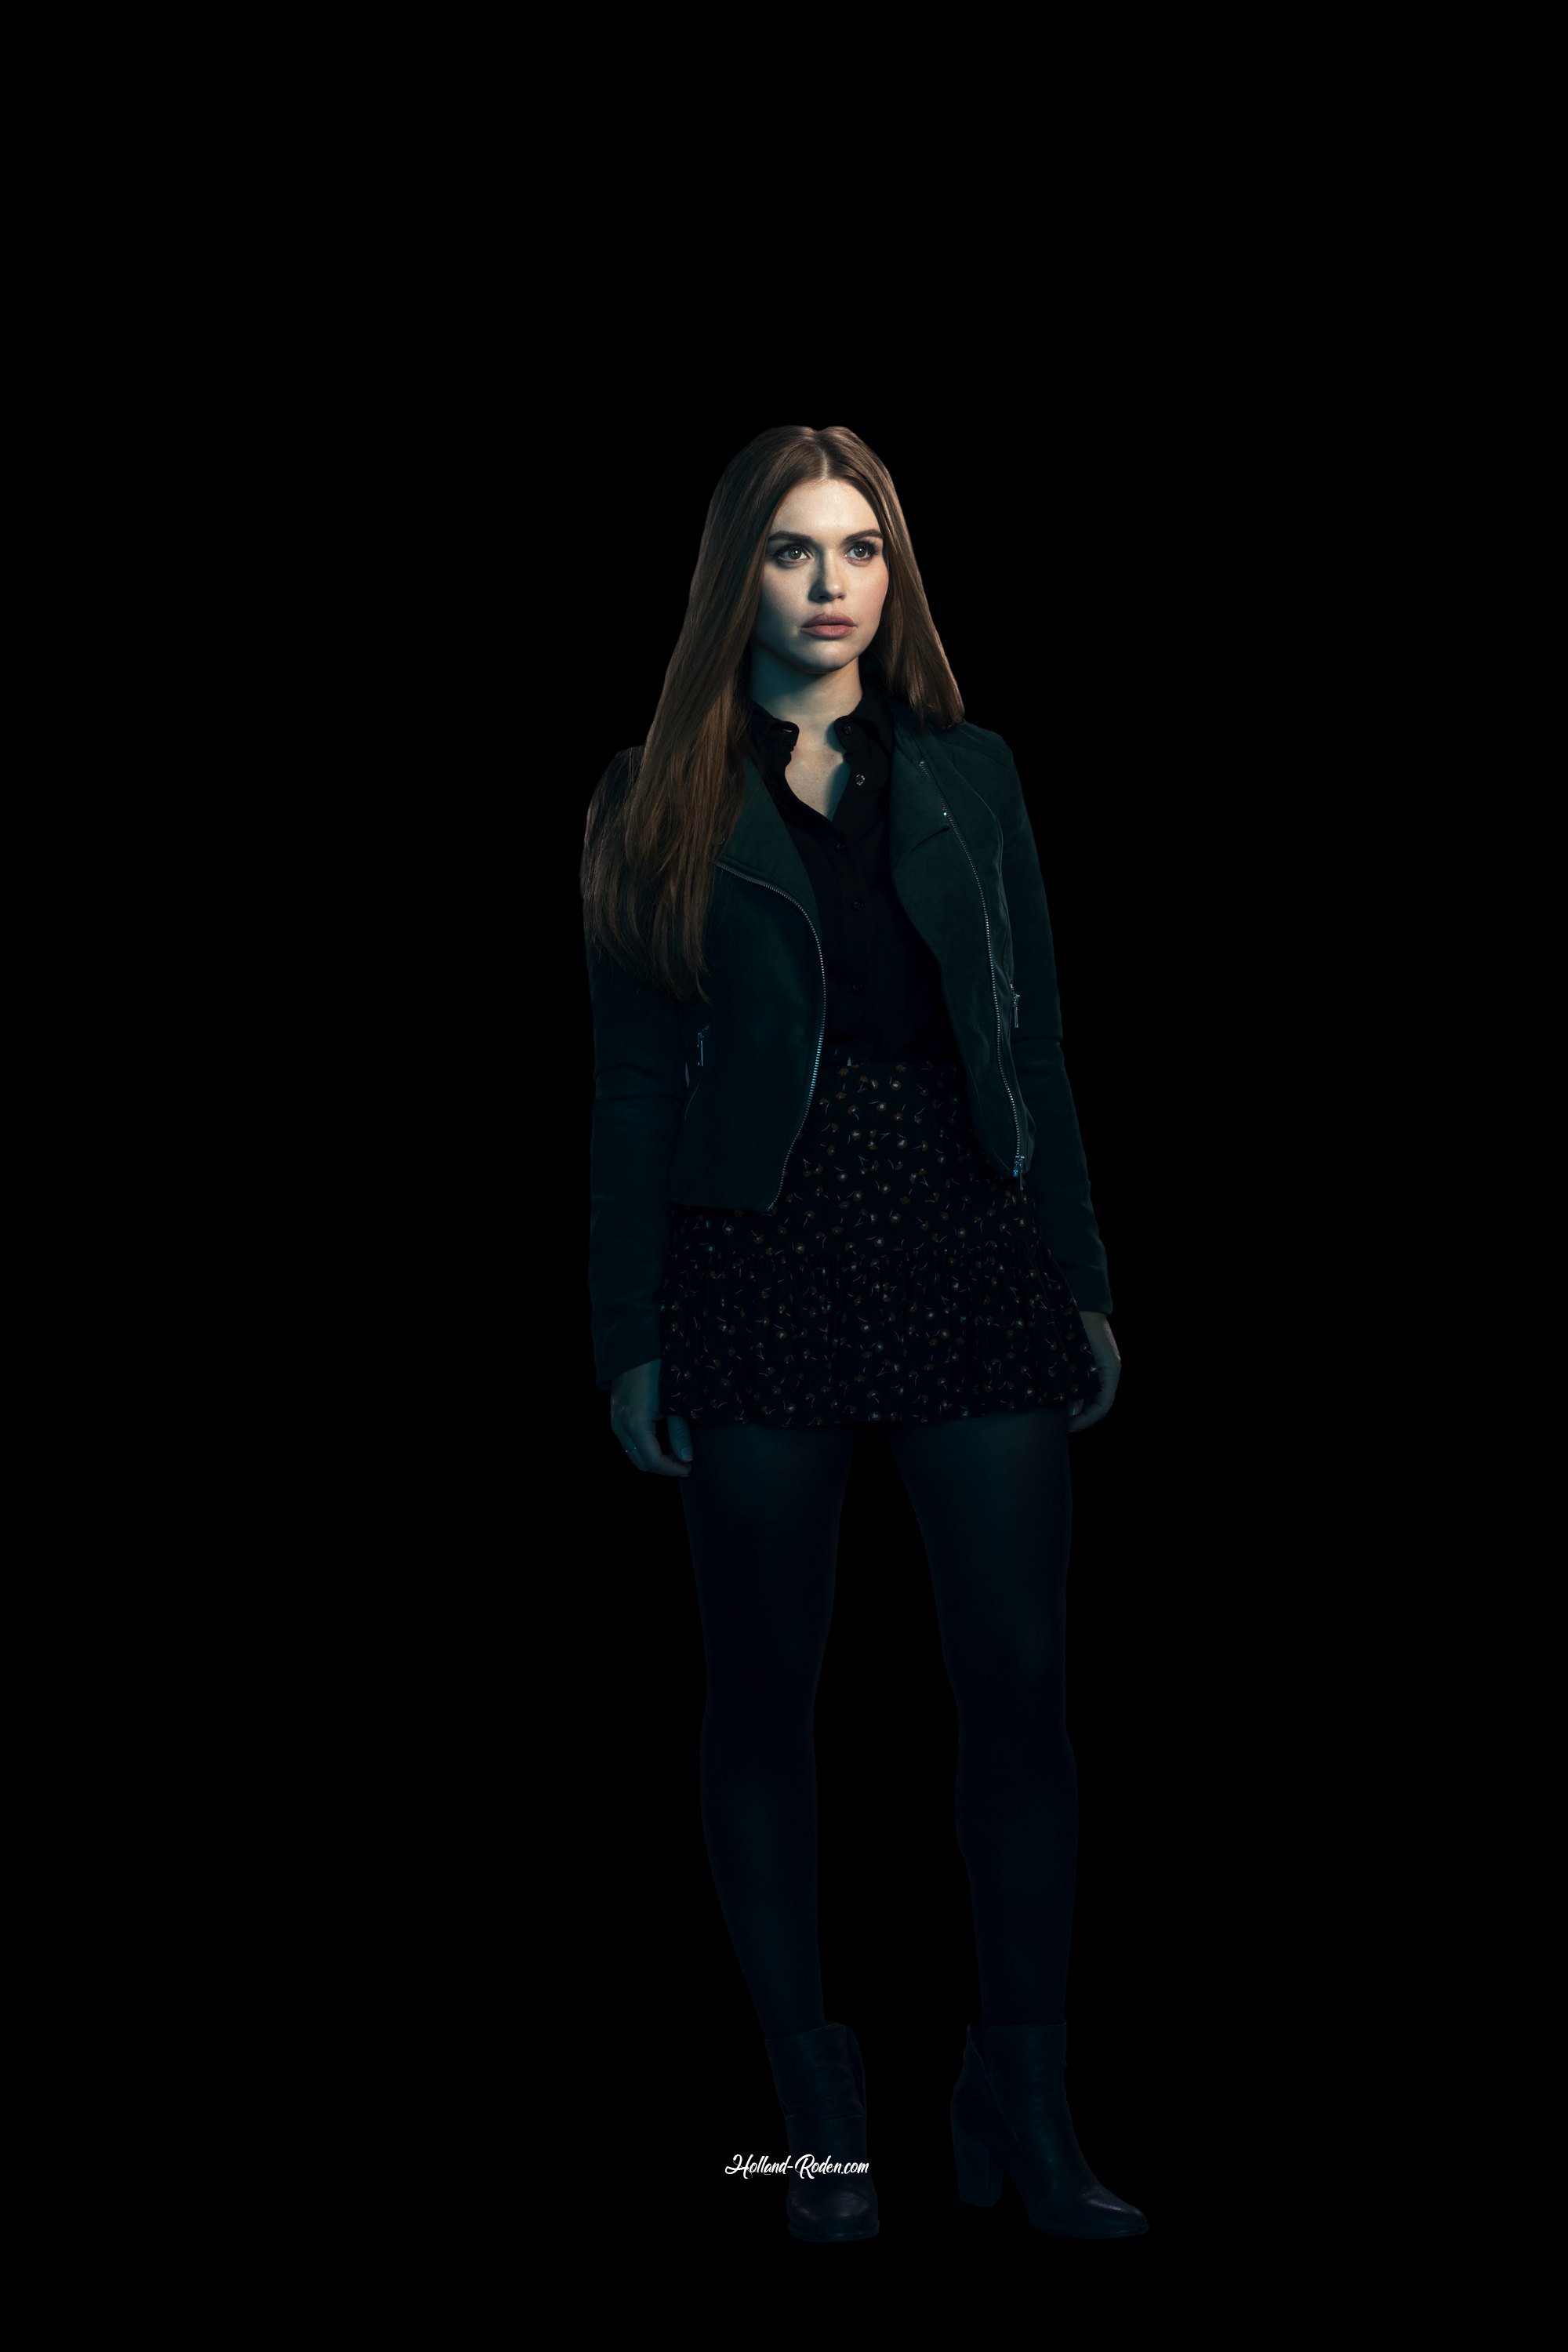 Holland Roden 2018 Wallpapers